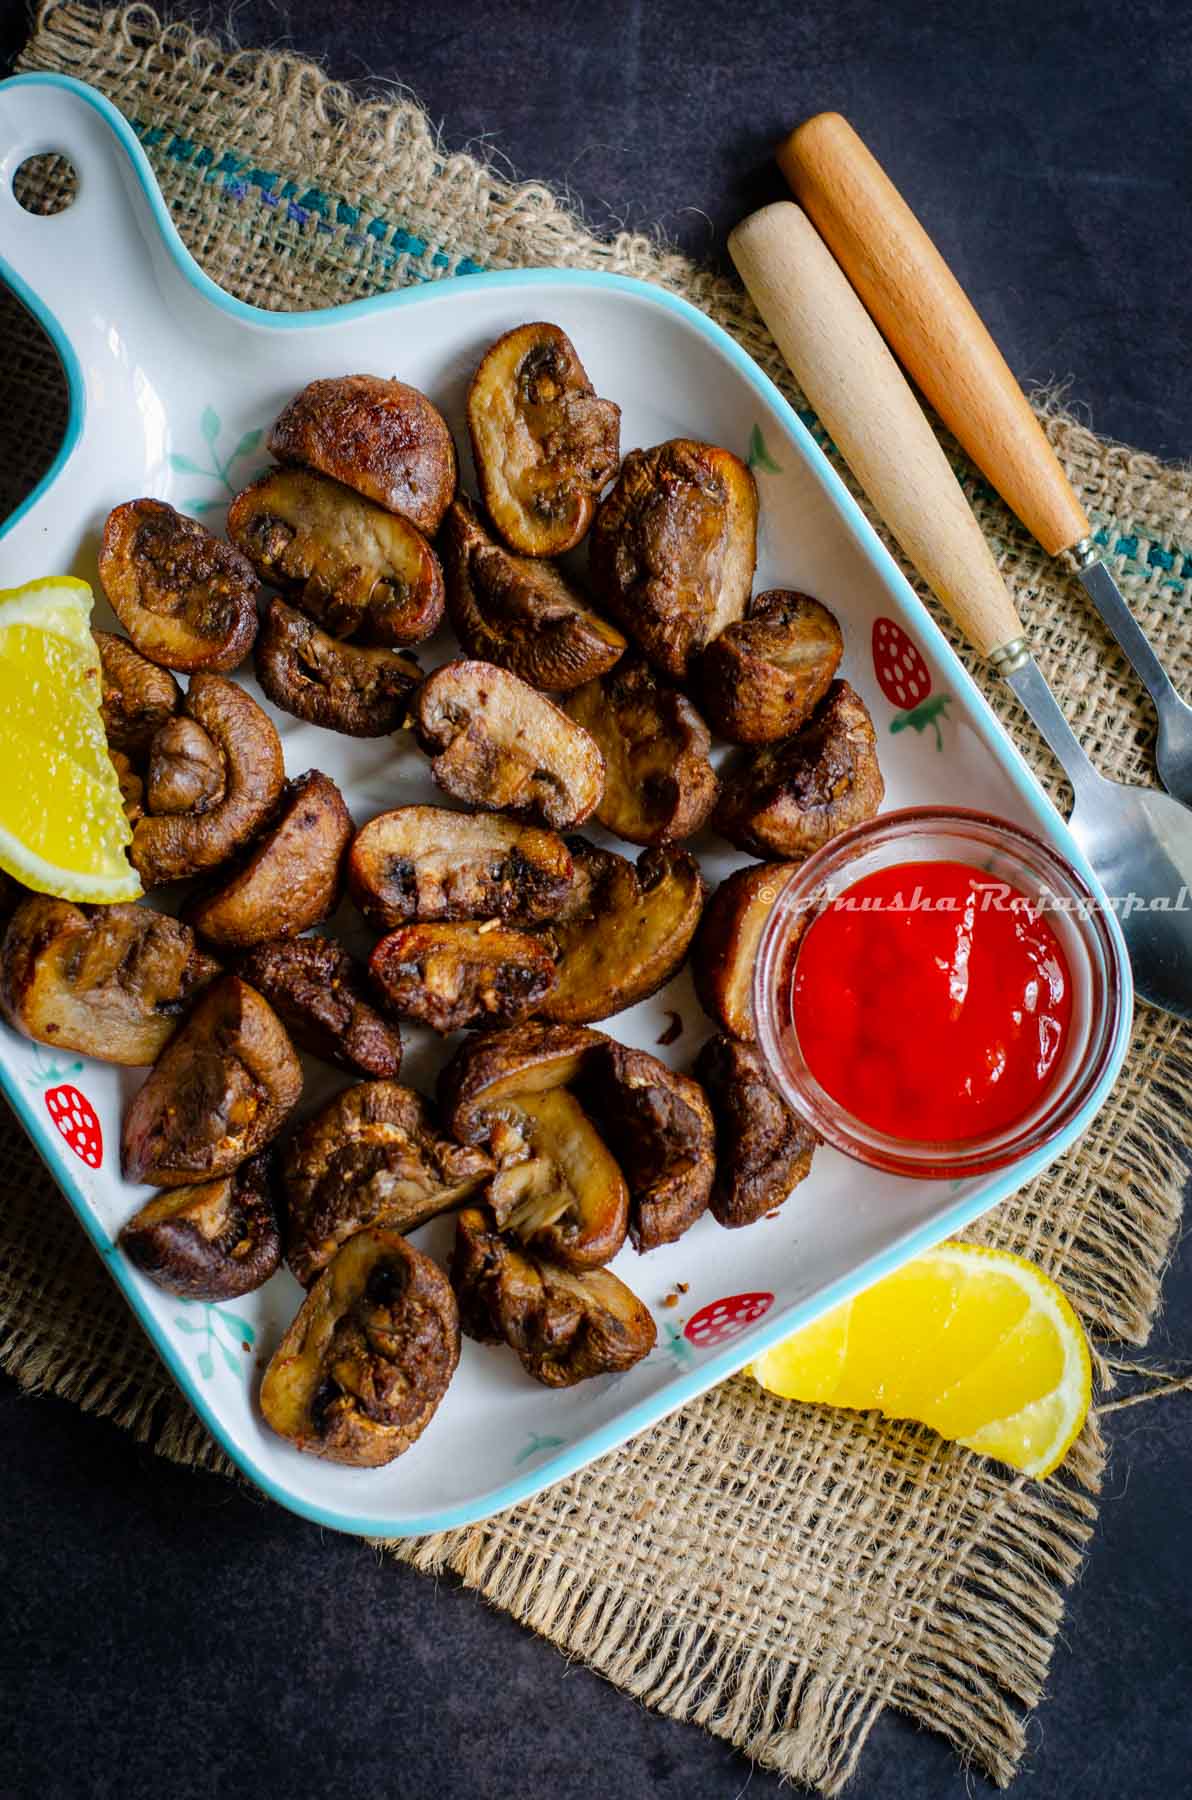 Air fried mushrooms and a small glass dip bowl with sriracha sauce served in a  blue rimmed white square platter. Lemon wedge on the mushrooms. Platter placed on a burlap mat. Spoon and fork with wooden handle by the side. 